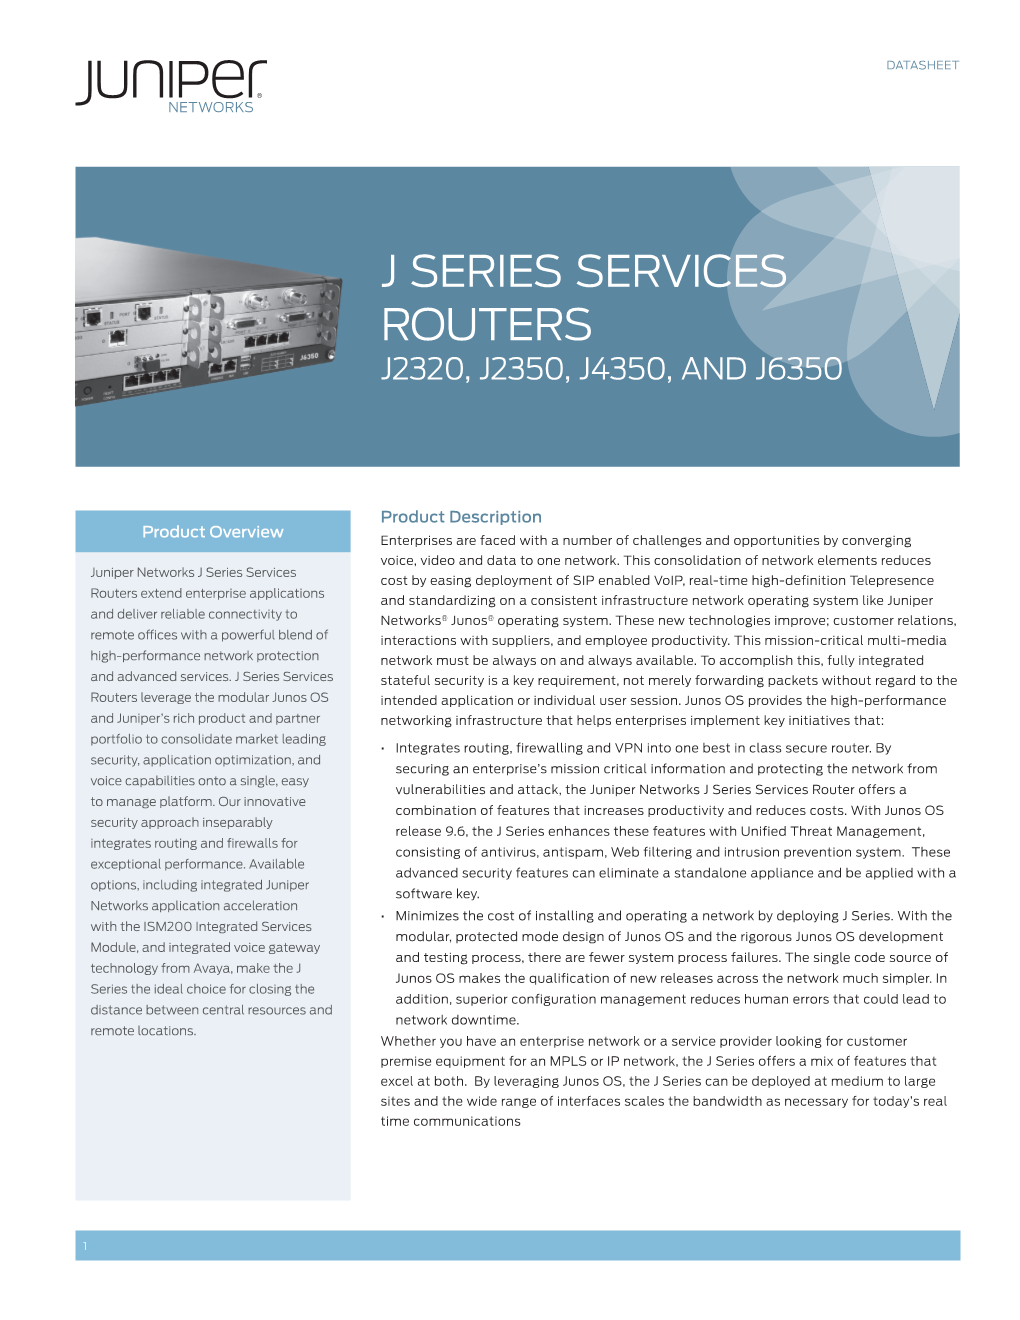 J Series Services Routers: J2320, J2350, J4350, and J6350